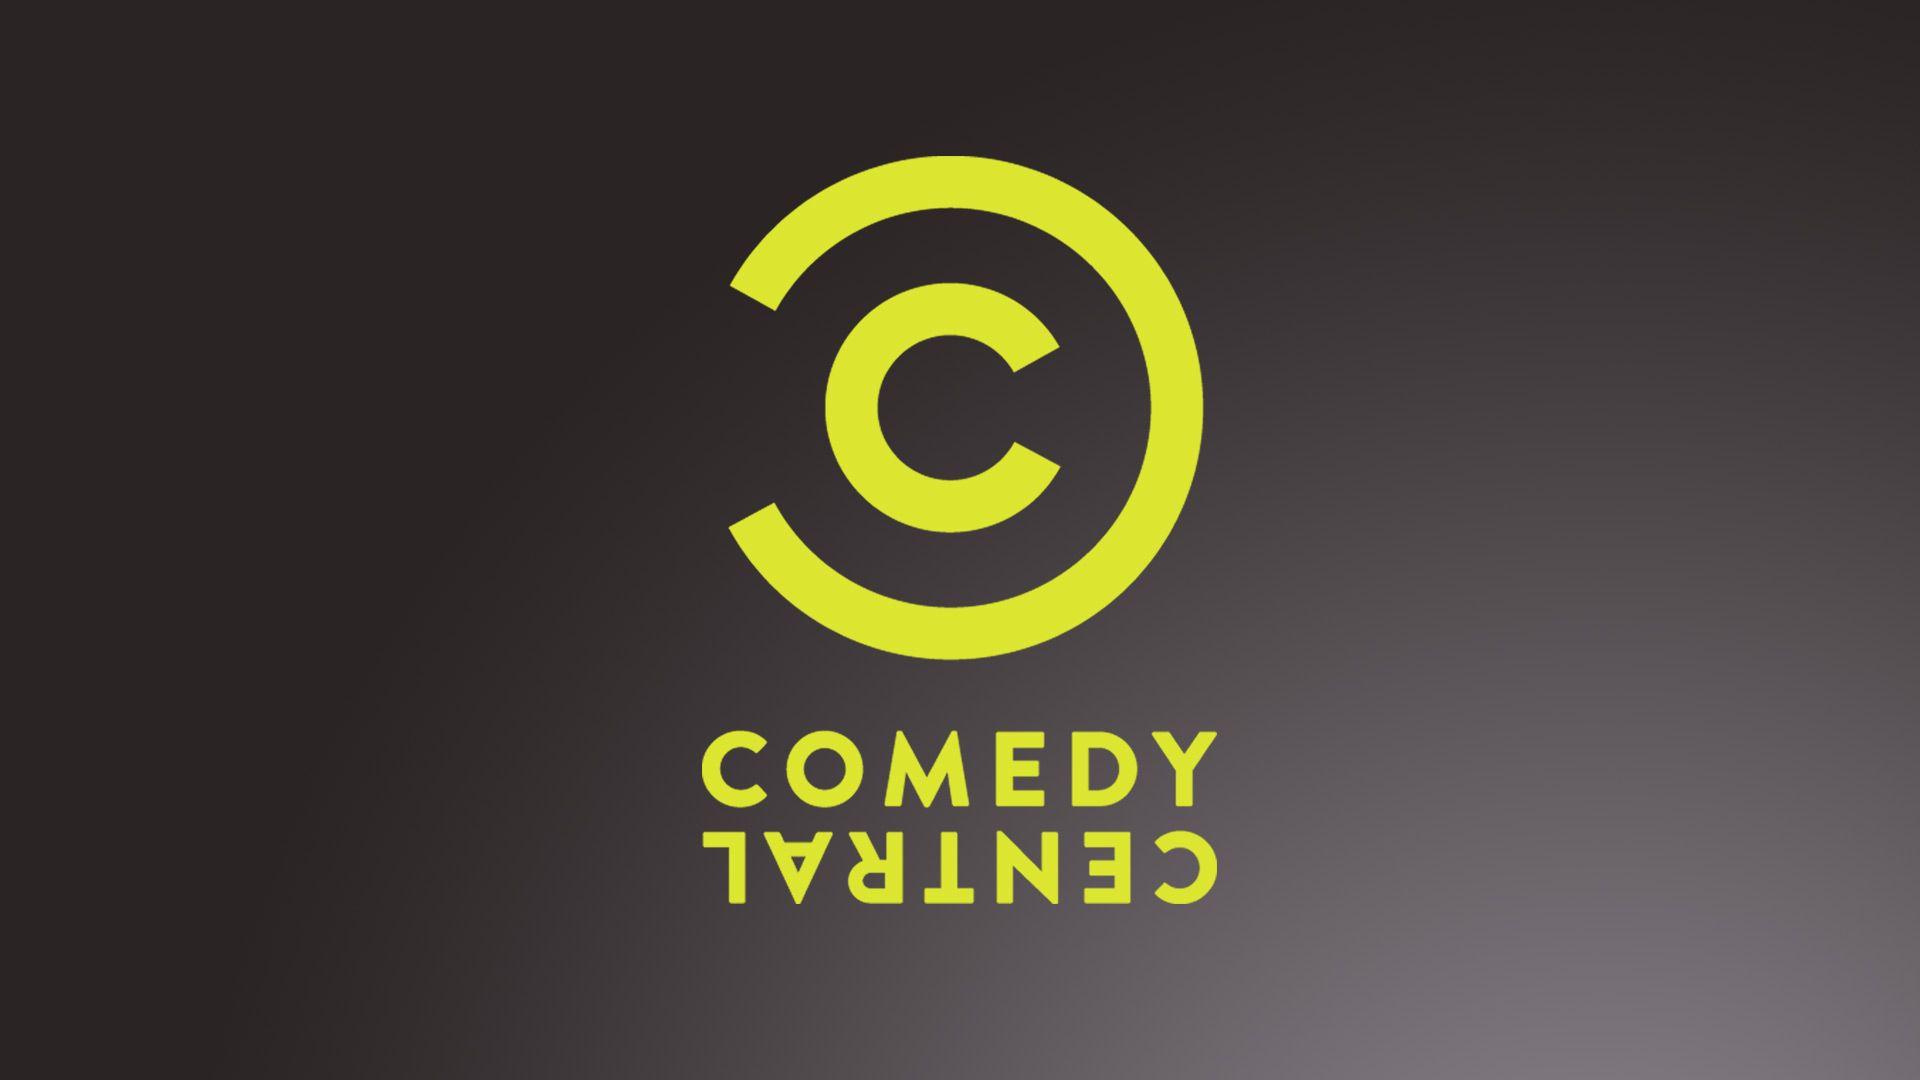 Comedy Central Logo - Comedy Central Official Site - TV Show Full Episodes & Funny Video Clips